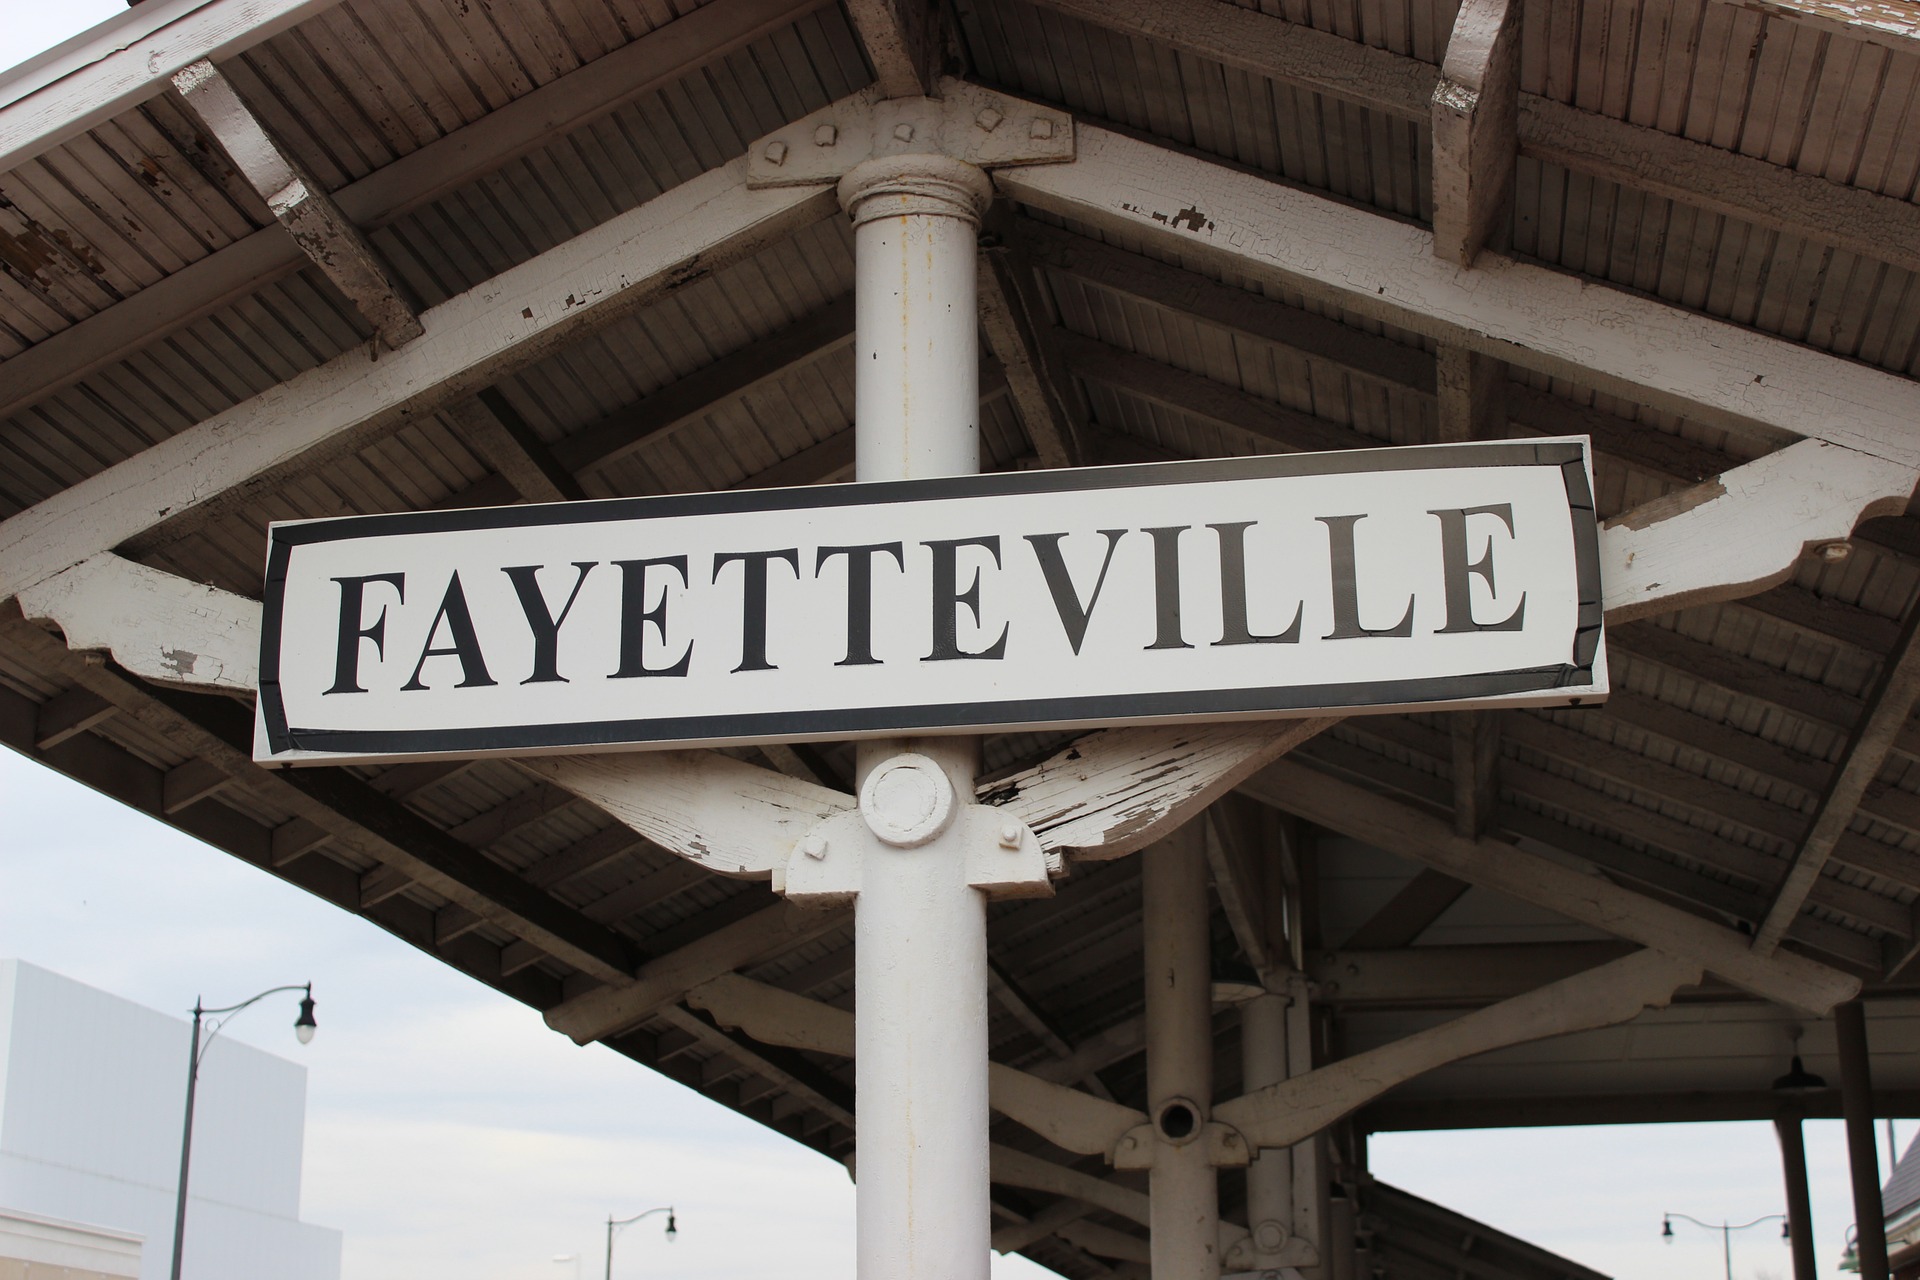 A white wooden & tiled roof is giving a traditional look to an old train station in Fayetteville.